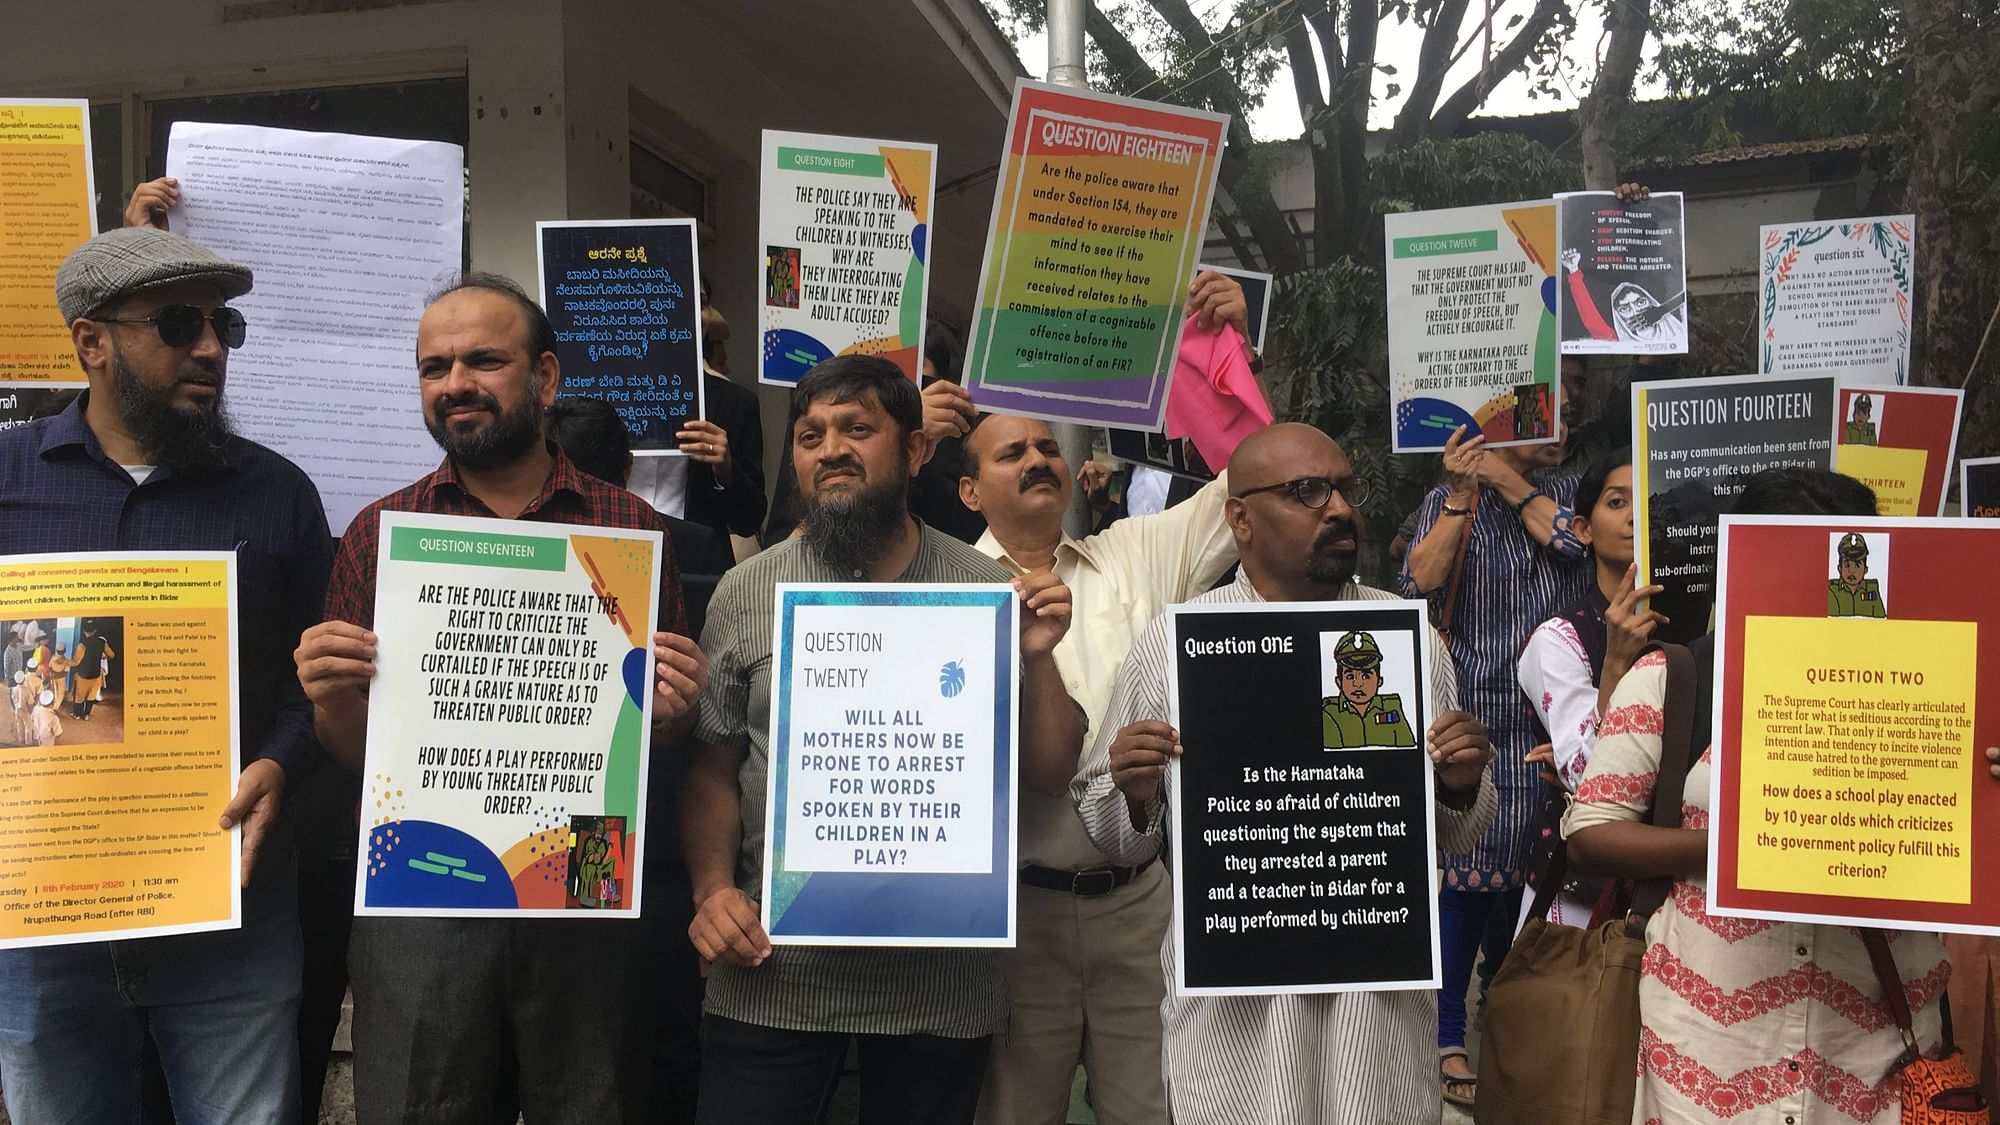 Several citizens, activists and lawyers came out to question Karnataka police chief over the alleged misuse of sedition law in the Bidar case and "illegal harassment" of minors.